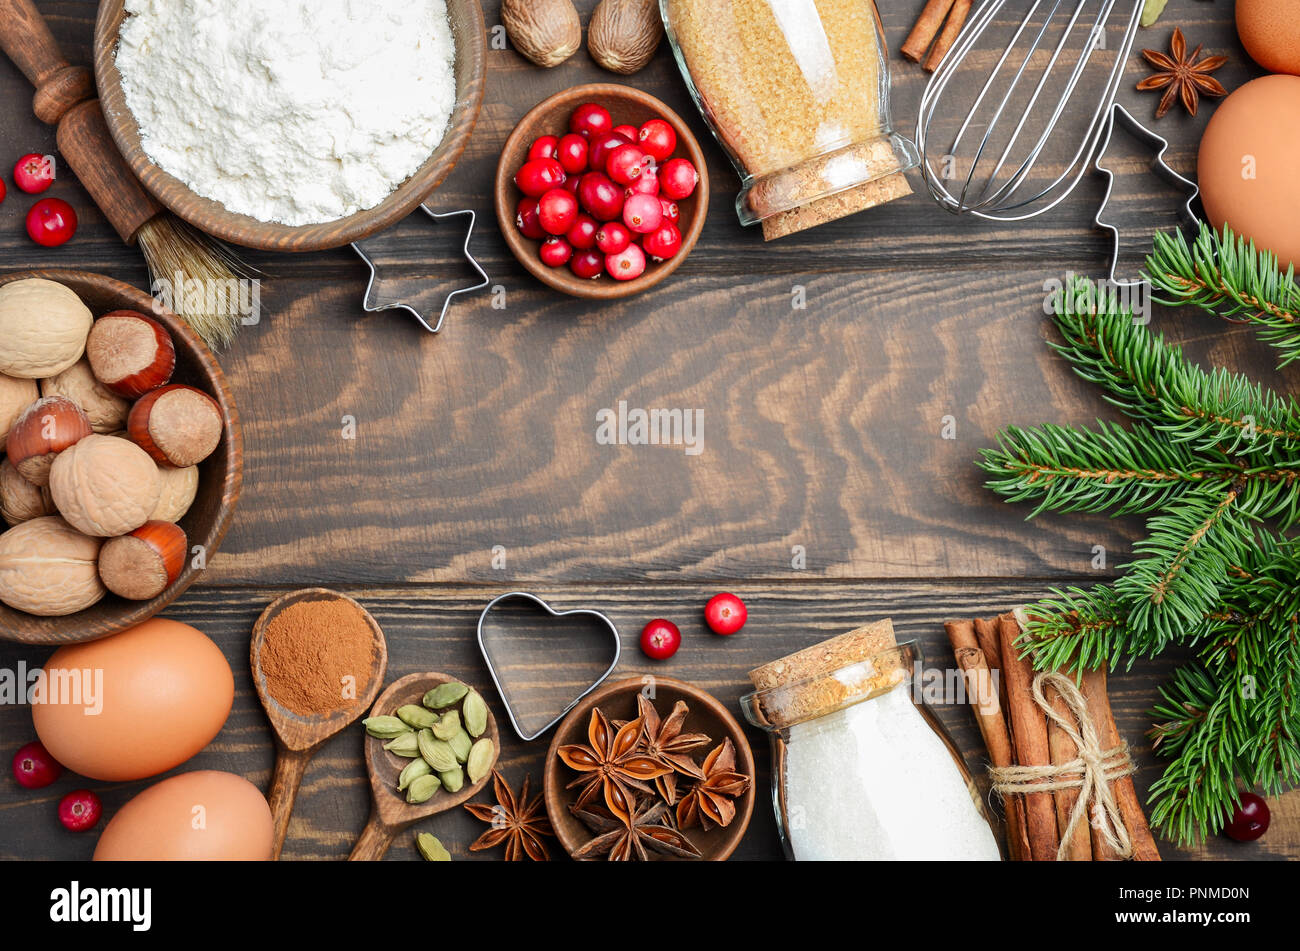 Christmas baking cake background. Ingredients and tools for baking - flour,  eggs, silicone molds in the shape of a Christmas tree, and a rolling pin on  a wooden background. Stock Photo